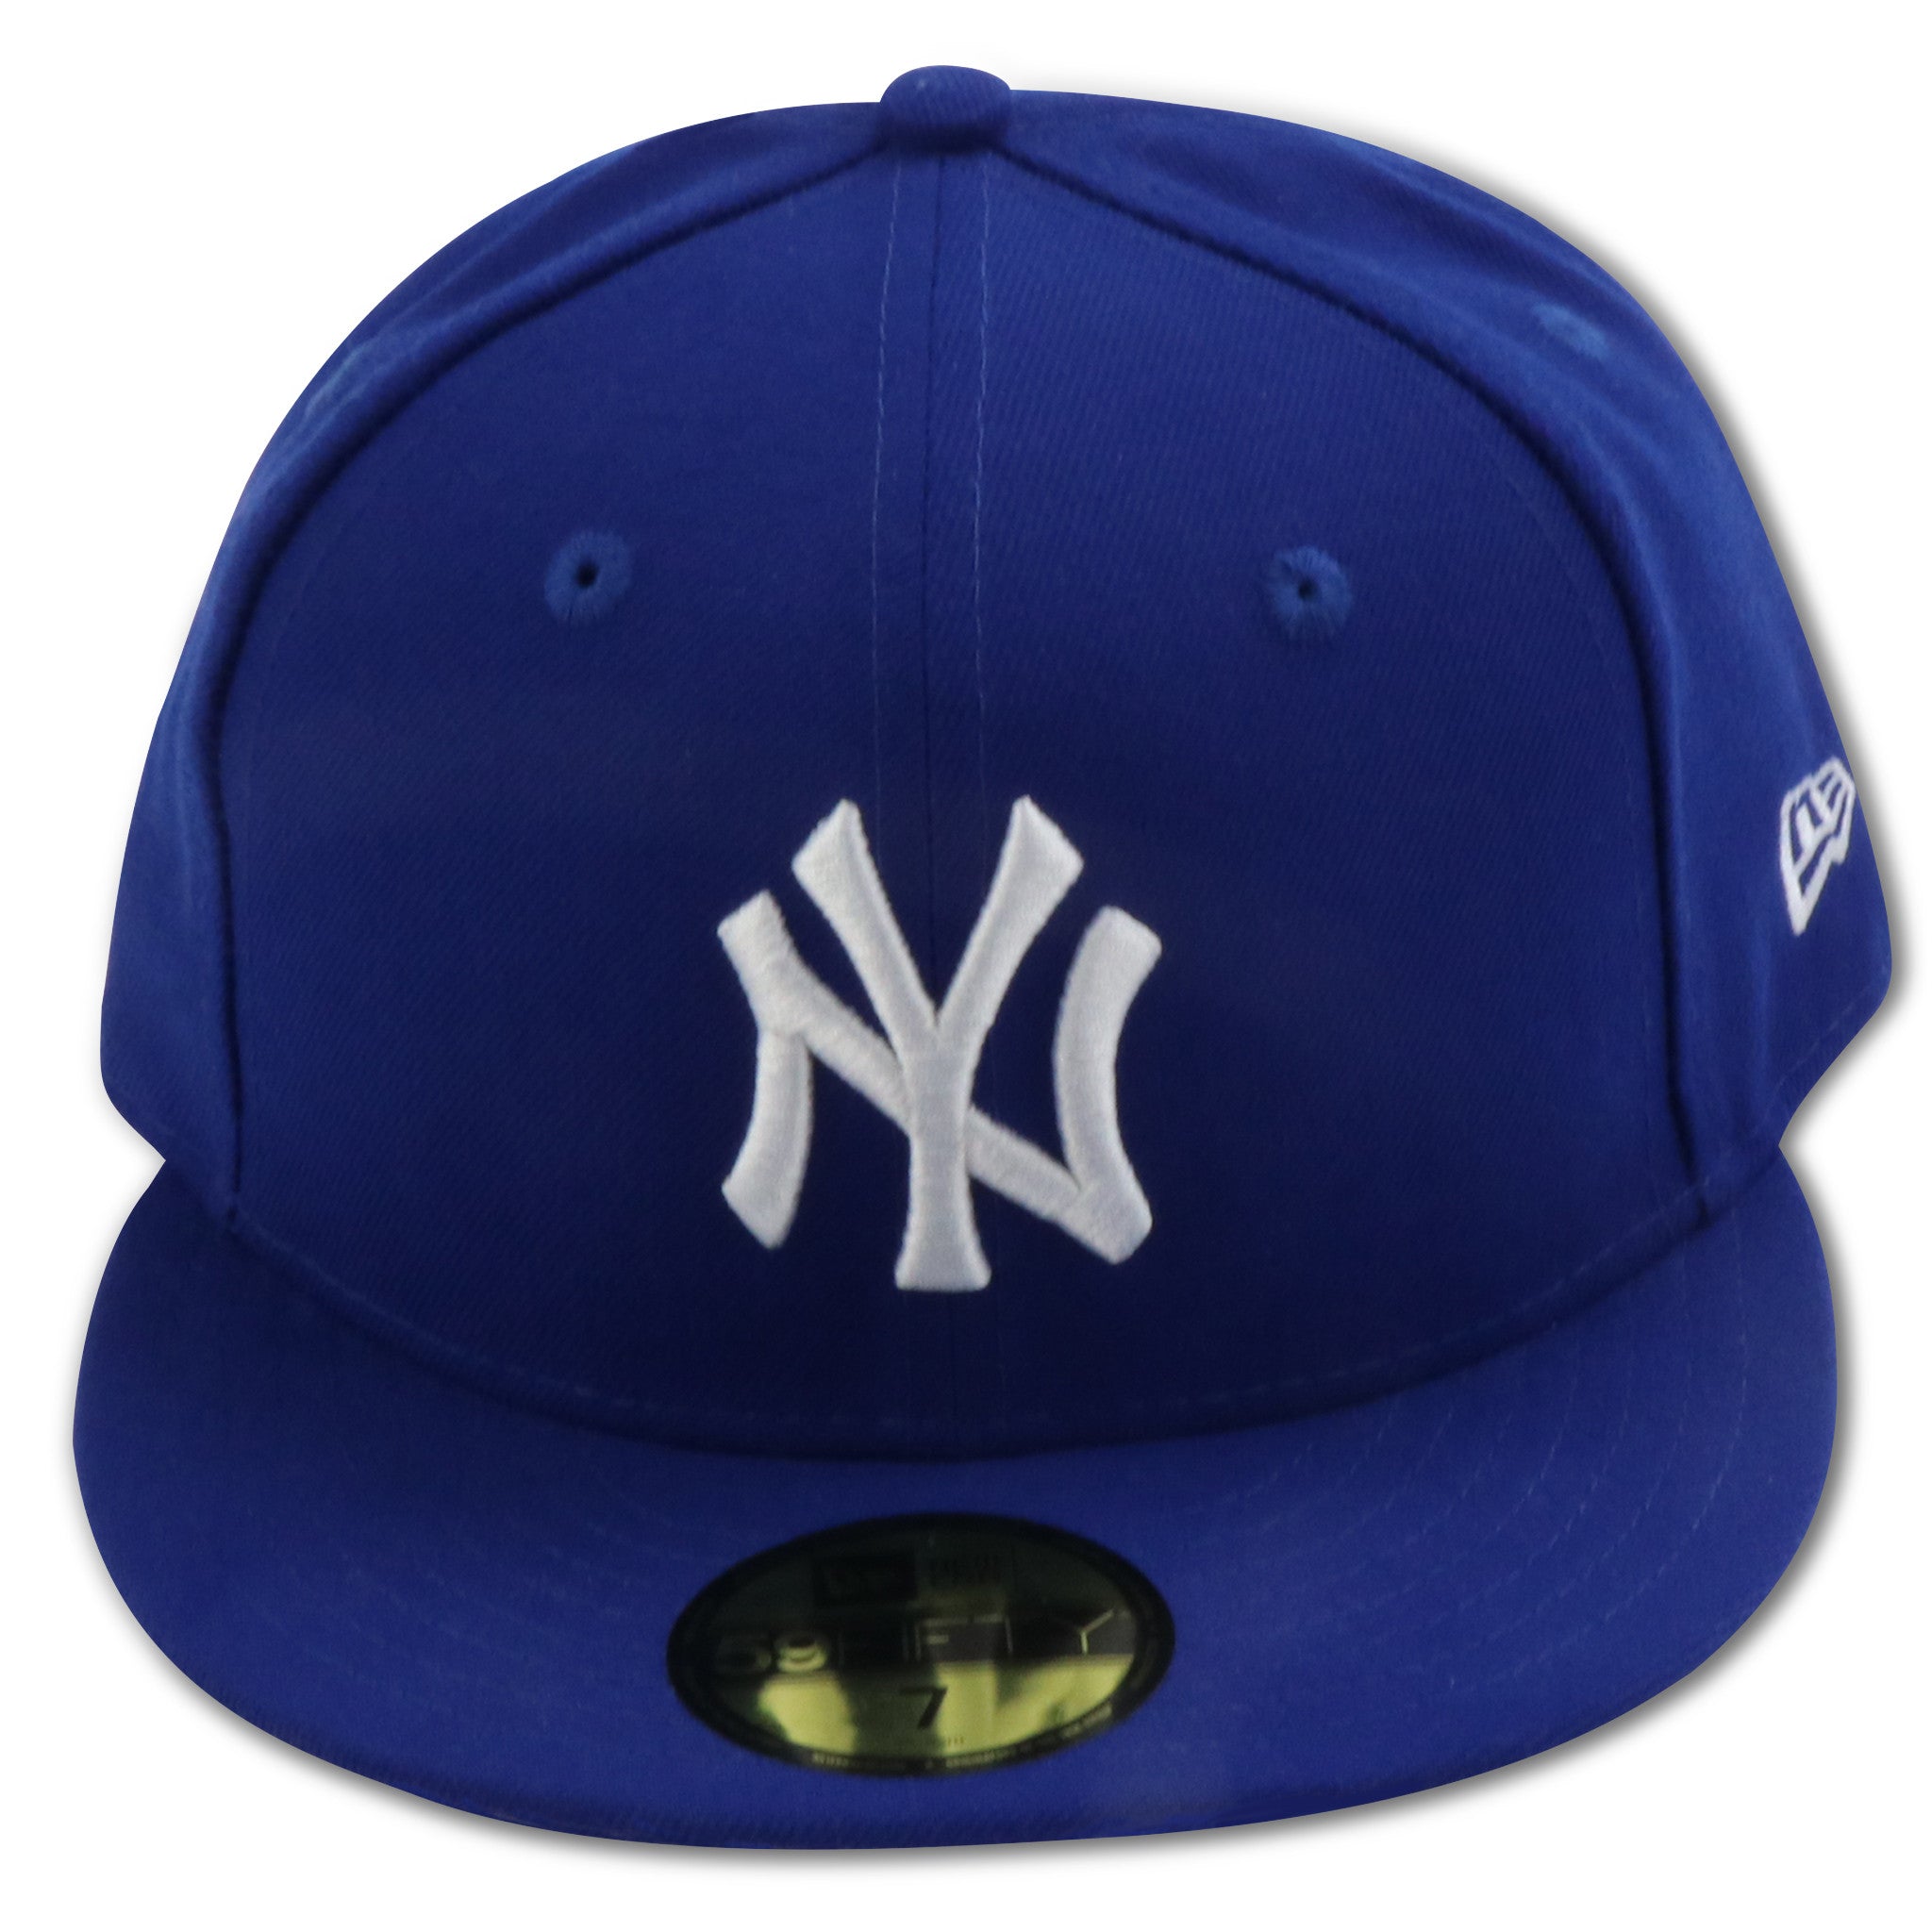 NEW YORK YANKEES (ROYAL/WHITE) NEW ERA 59FIFTY FITTED